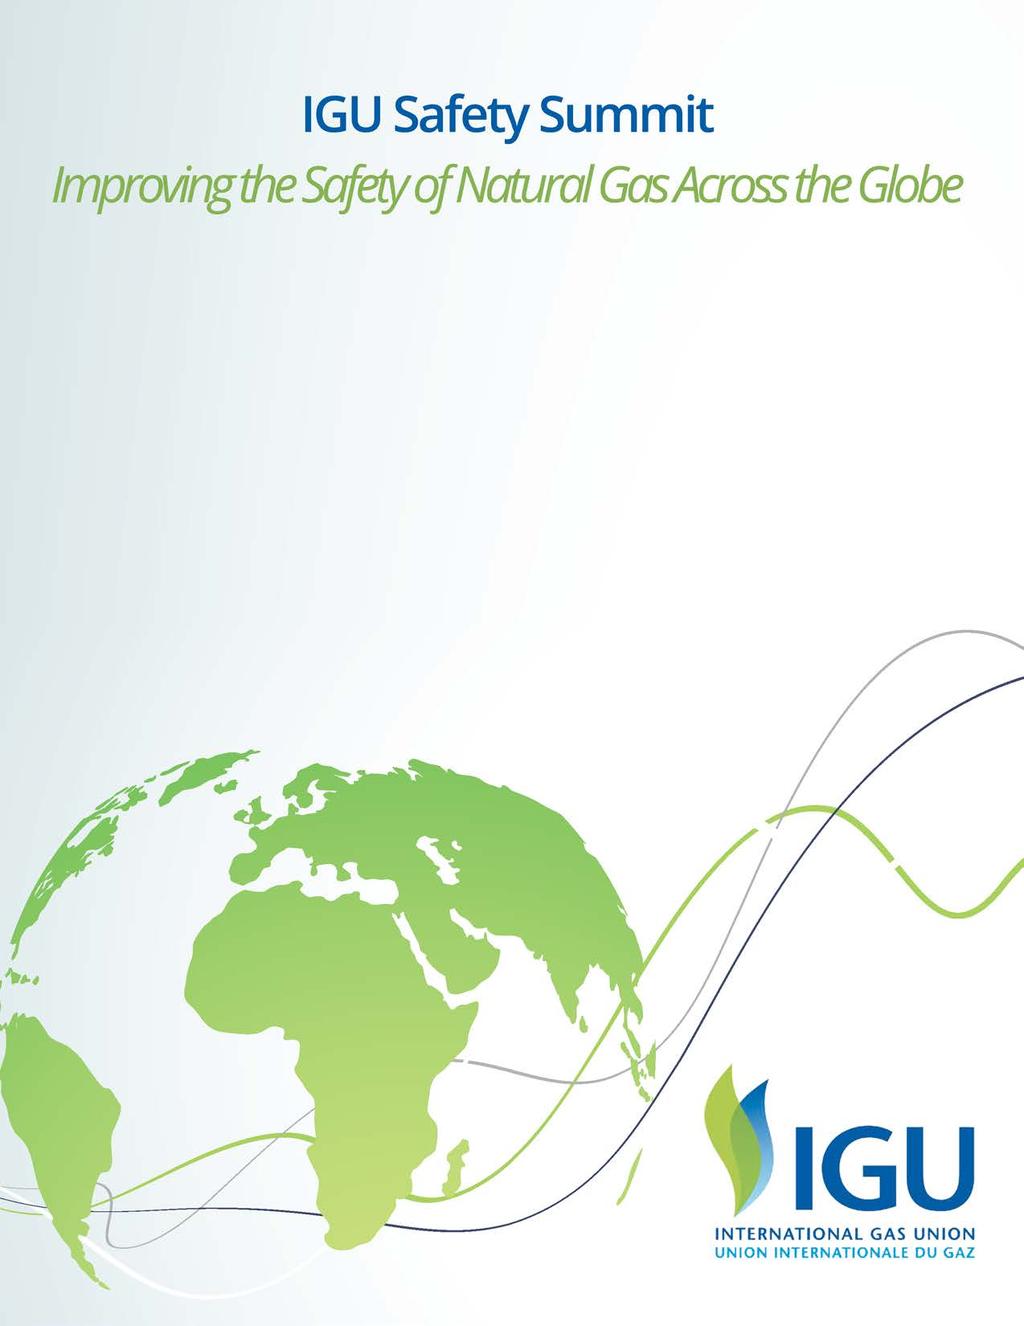 Welcome to the International Gas Union s Inaugural International Safety Summit Program Description This event will focus on all aspects of safety within the natural gas industry, including a sharing